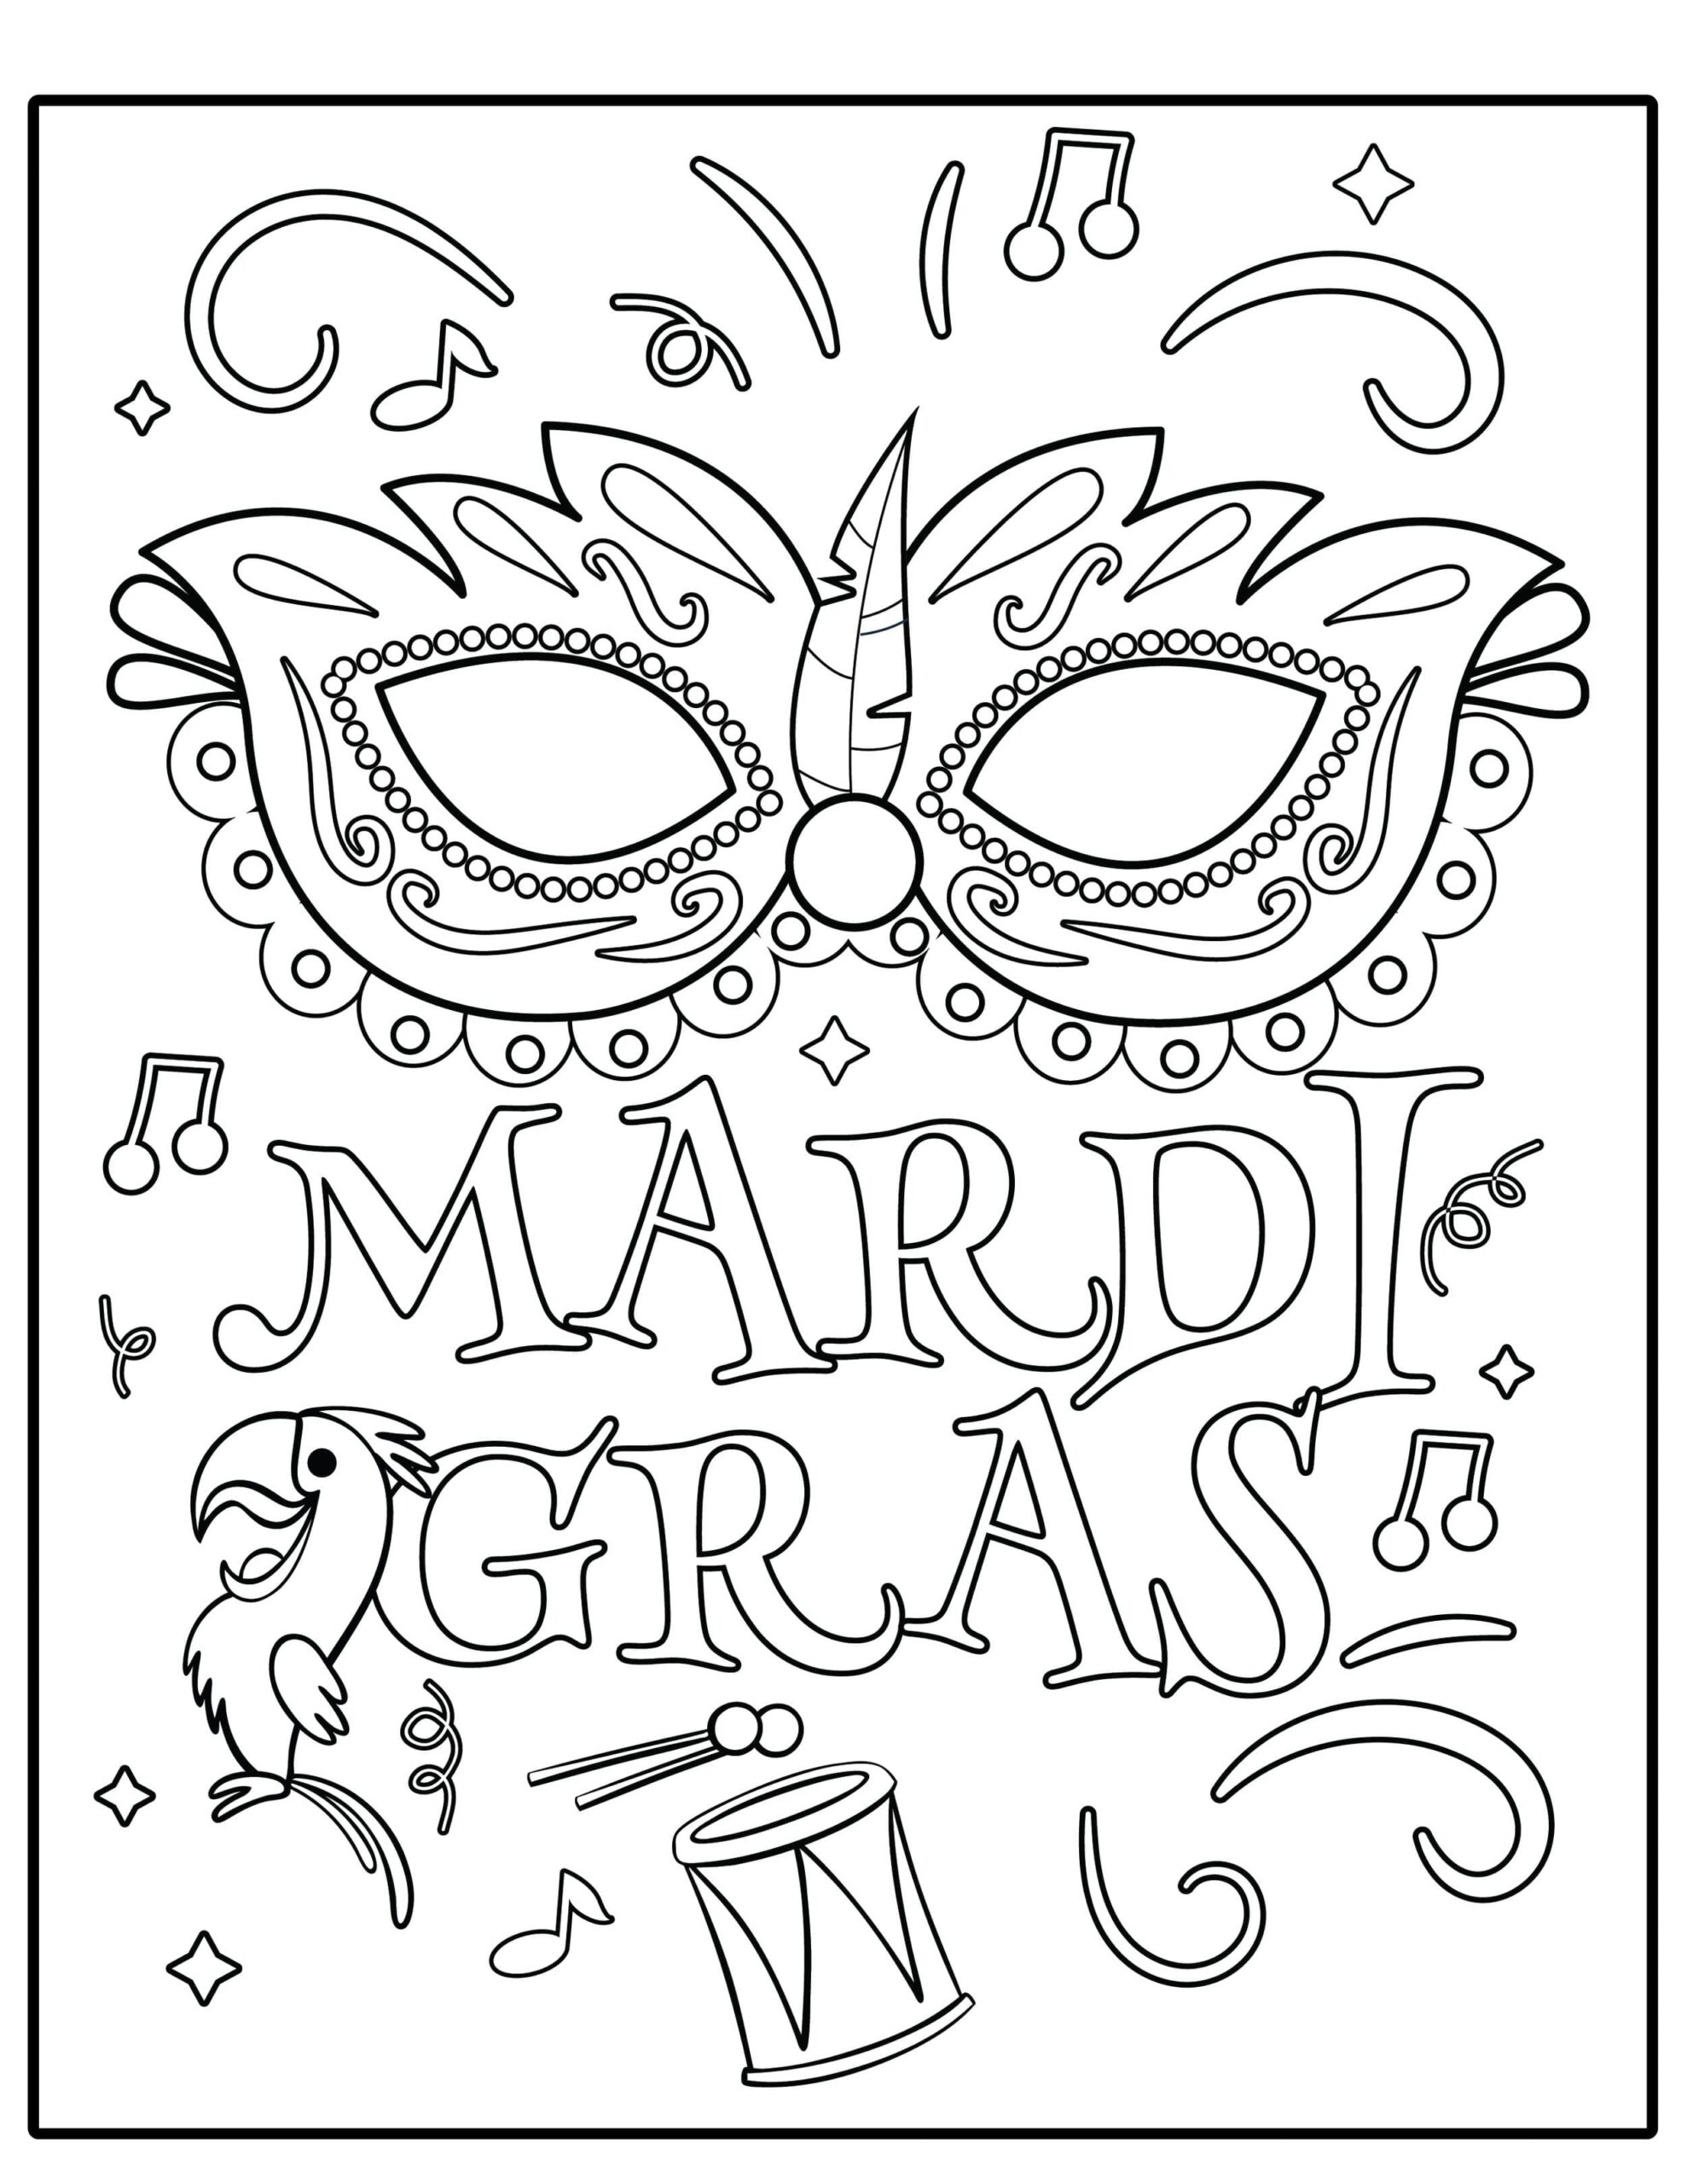 Mardi gras heart mask coloring page